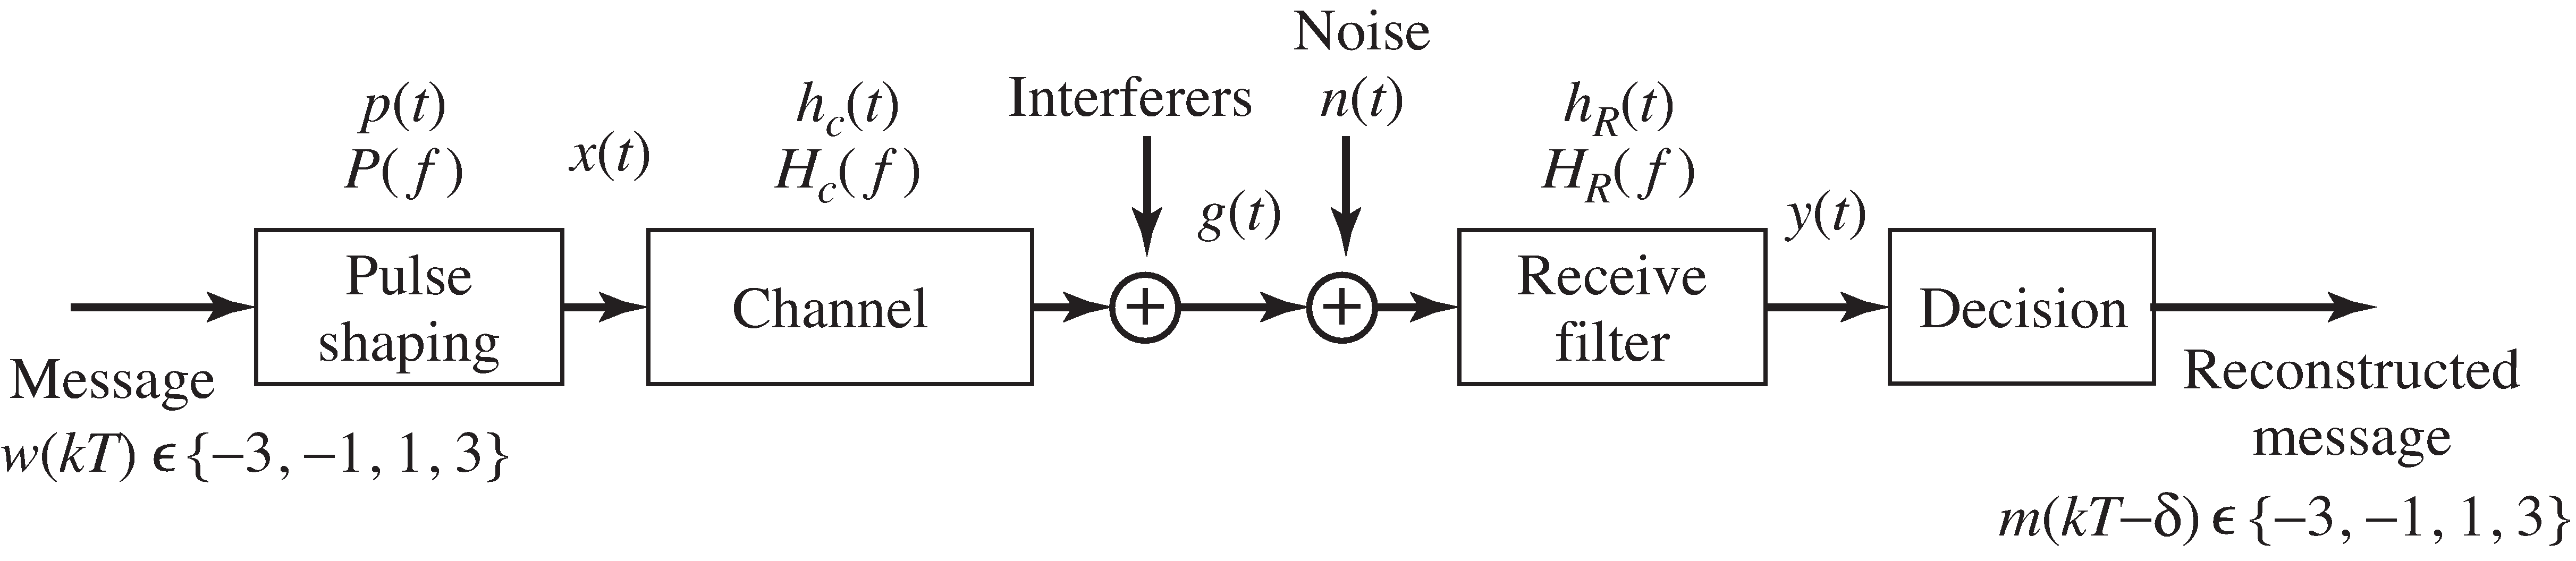 System diagram of a baseband communication system emphasizing the pulse shaping at the transmitter and the corresponding receive filtering at the receiver.